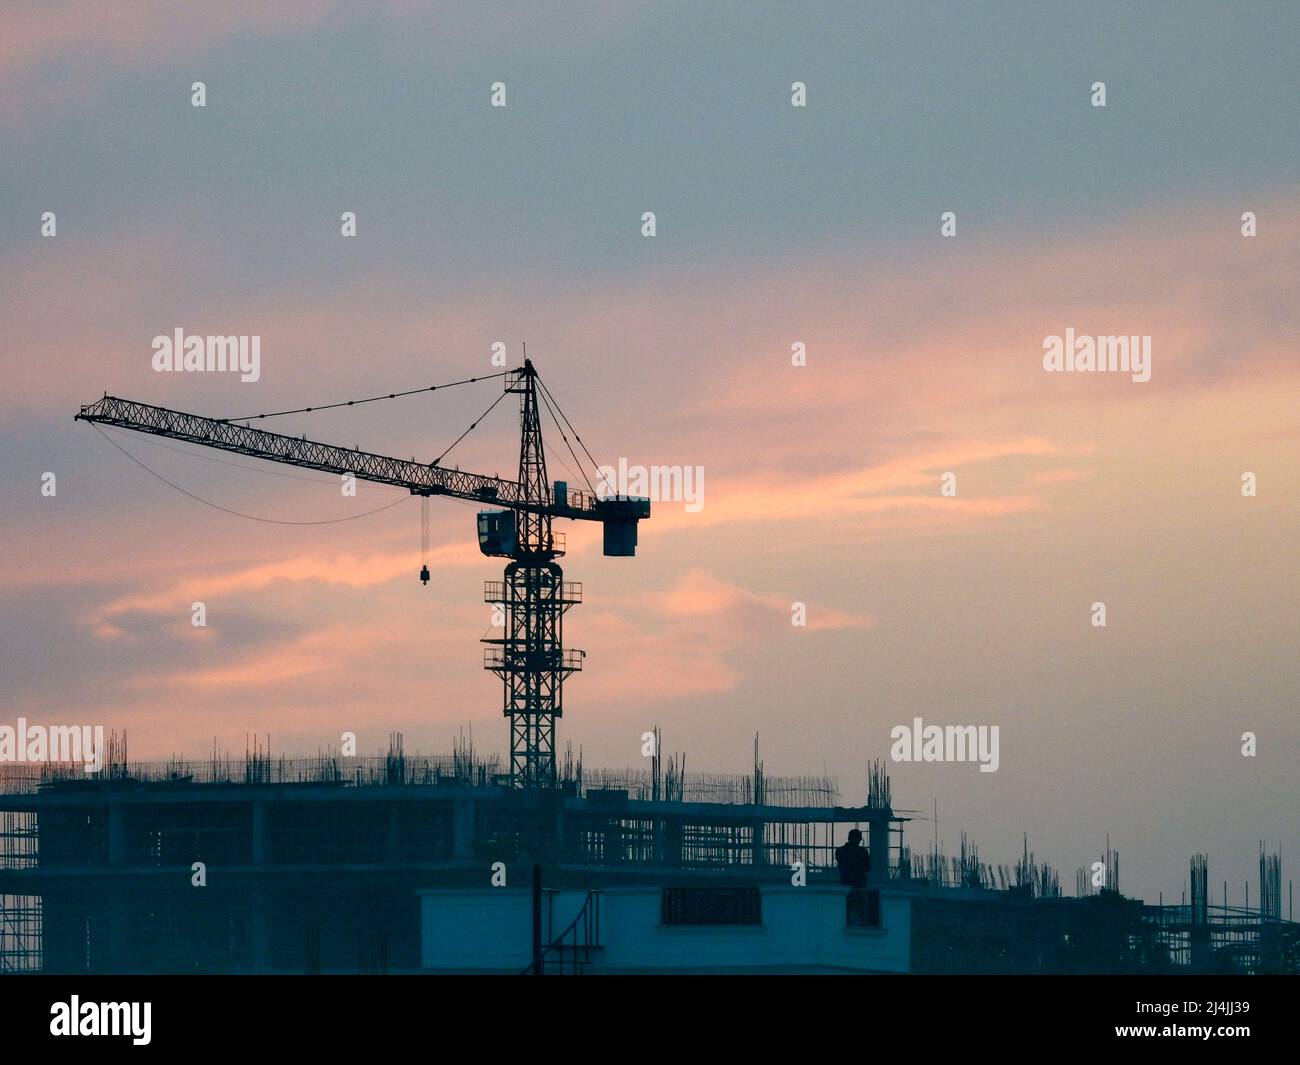 A wide-angle shot of a big heavy crane working on a construction site in the evening. Stock Photo